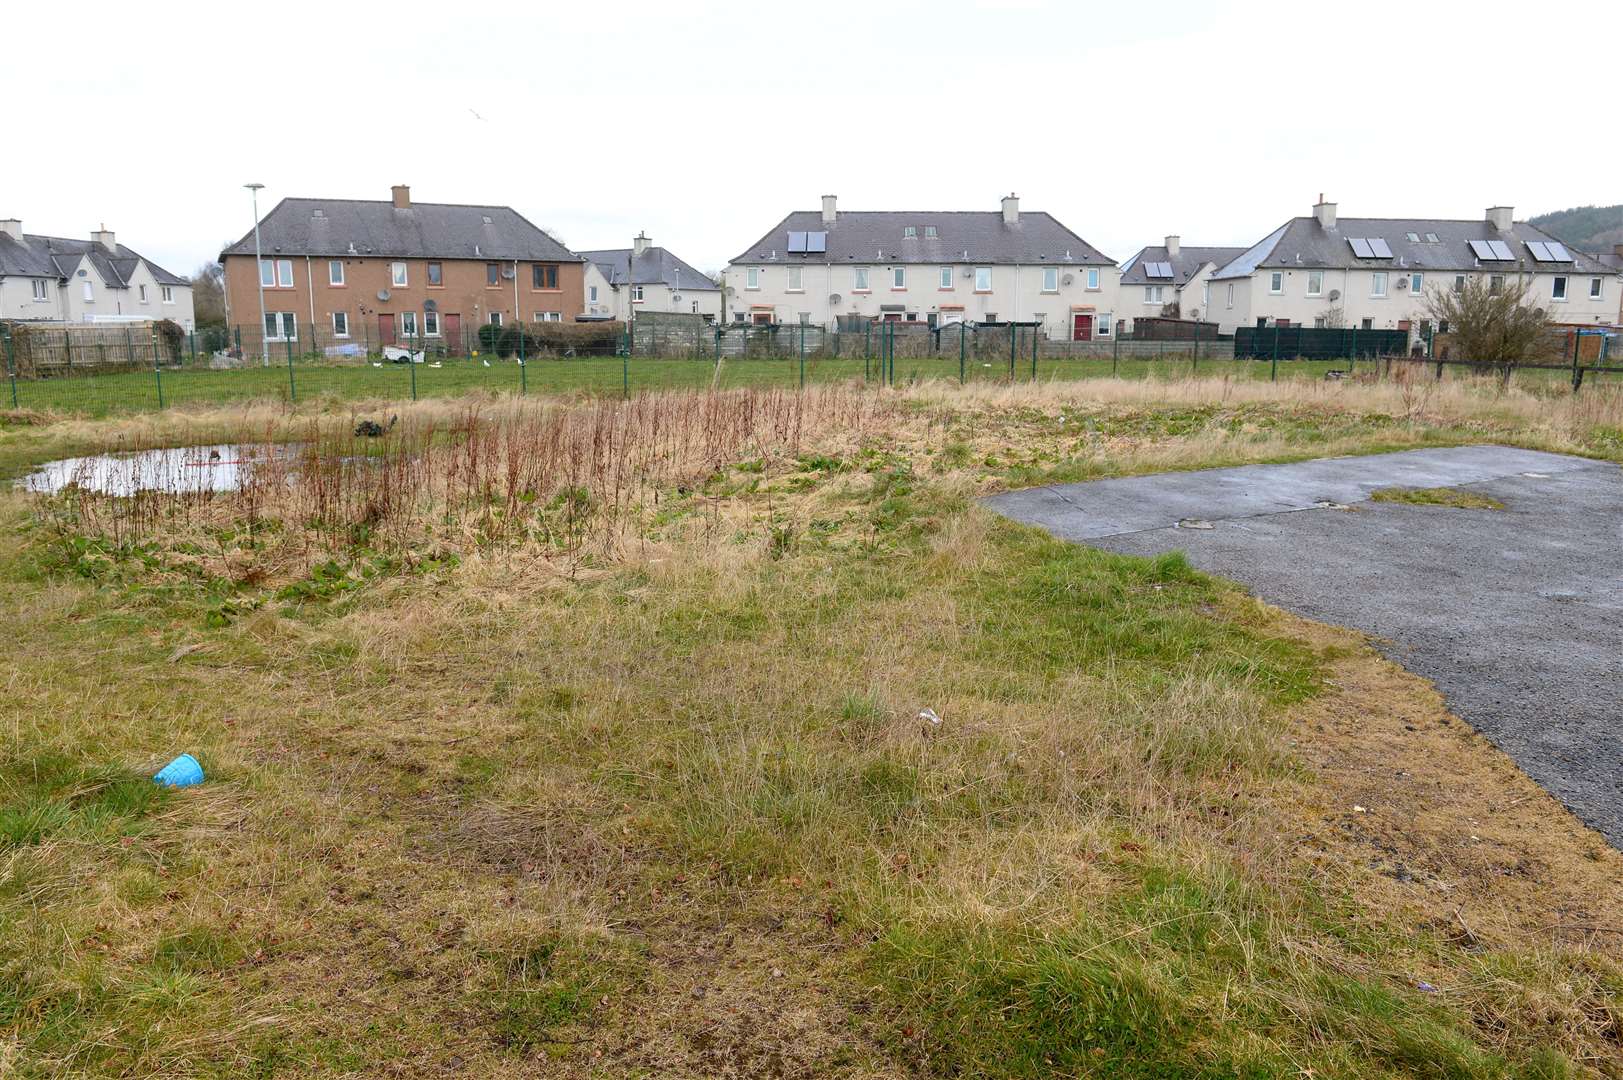 The site of the proposed housing development near Craigton Avenue.